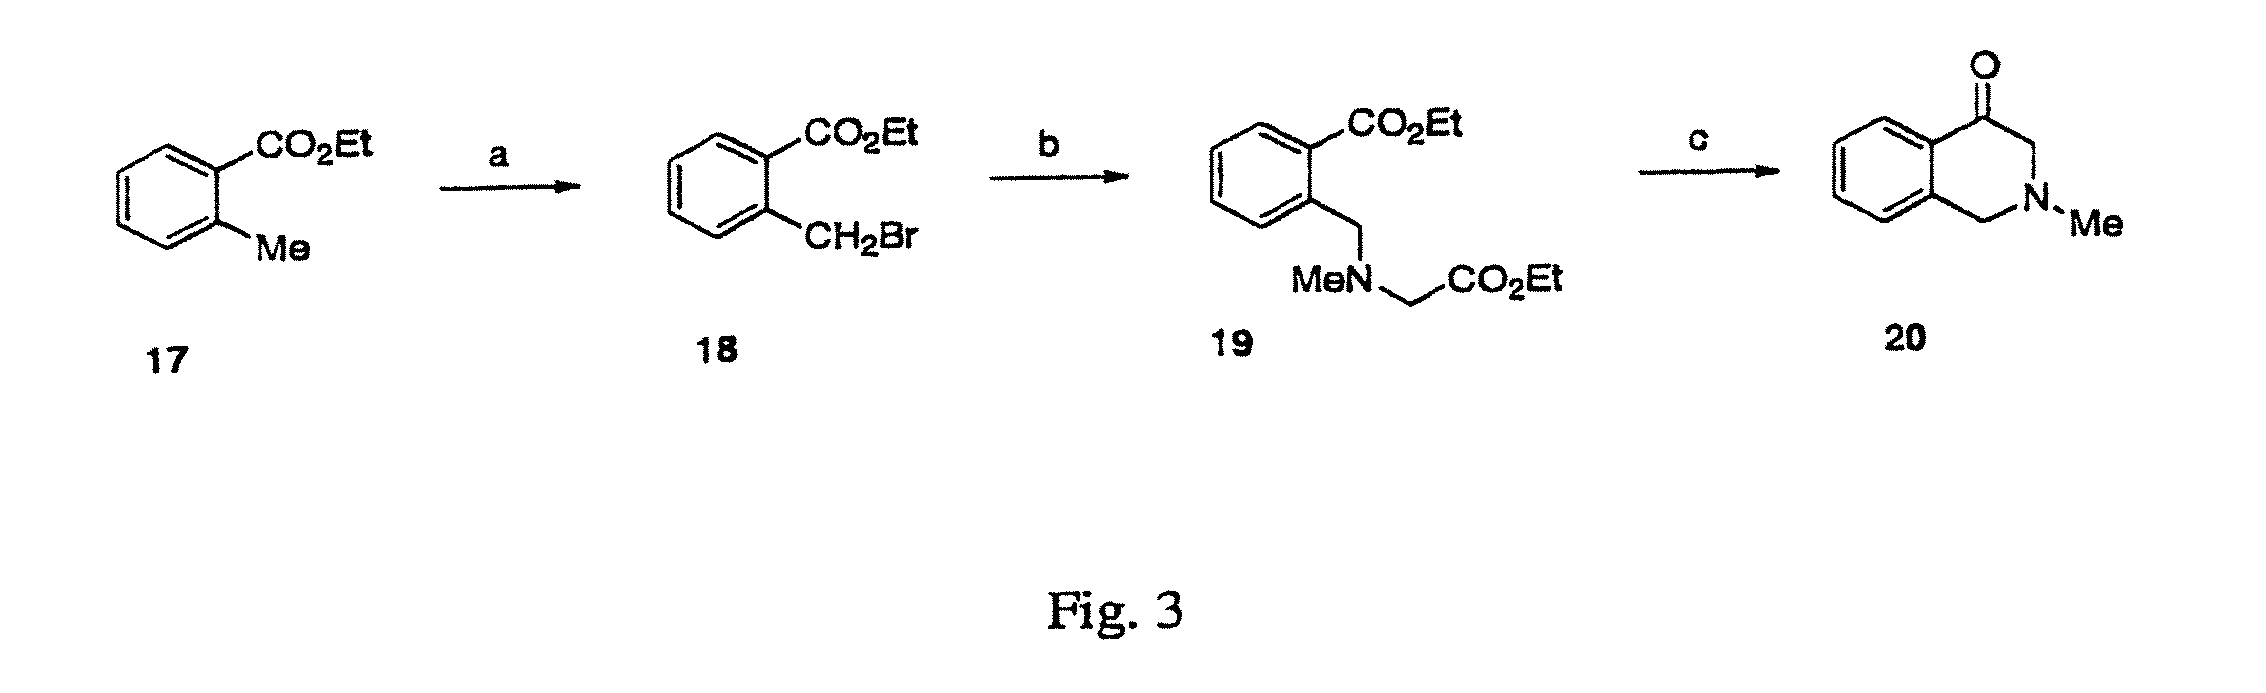 Co-Administration of Dopamine-Receptor Binding Compounds